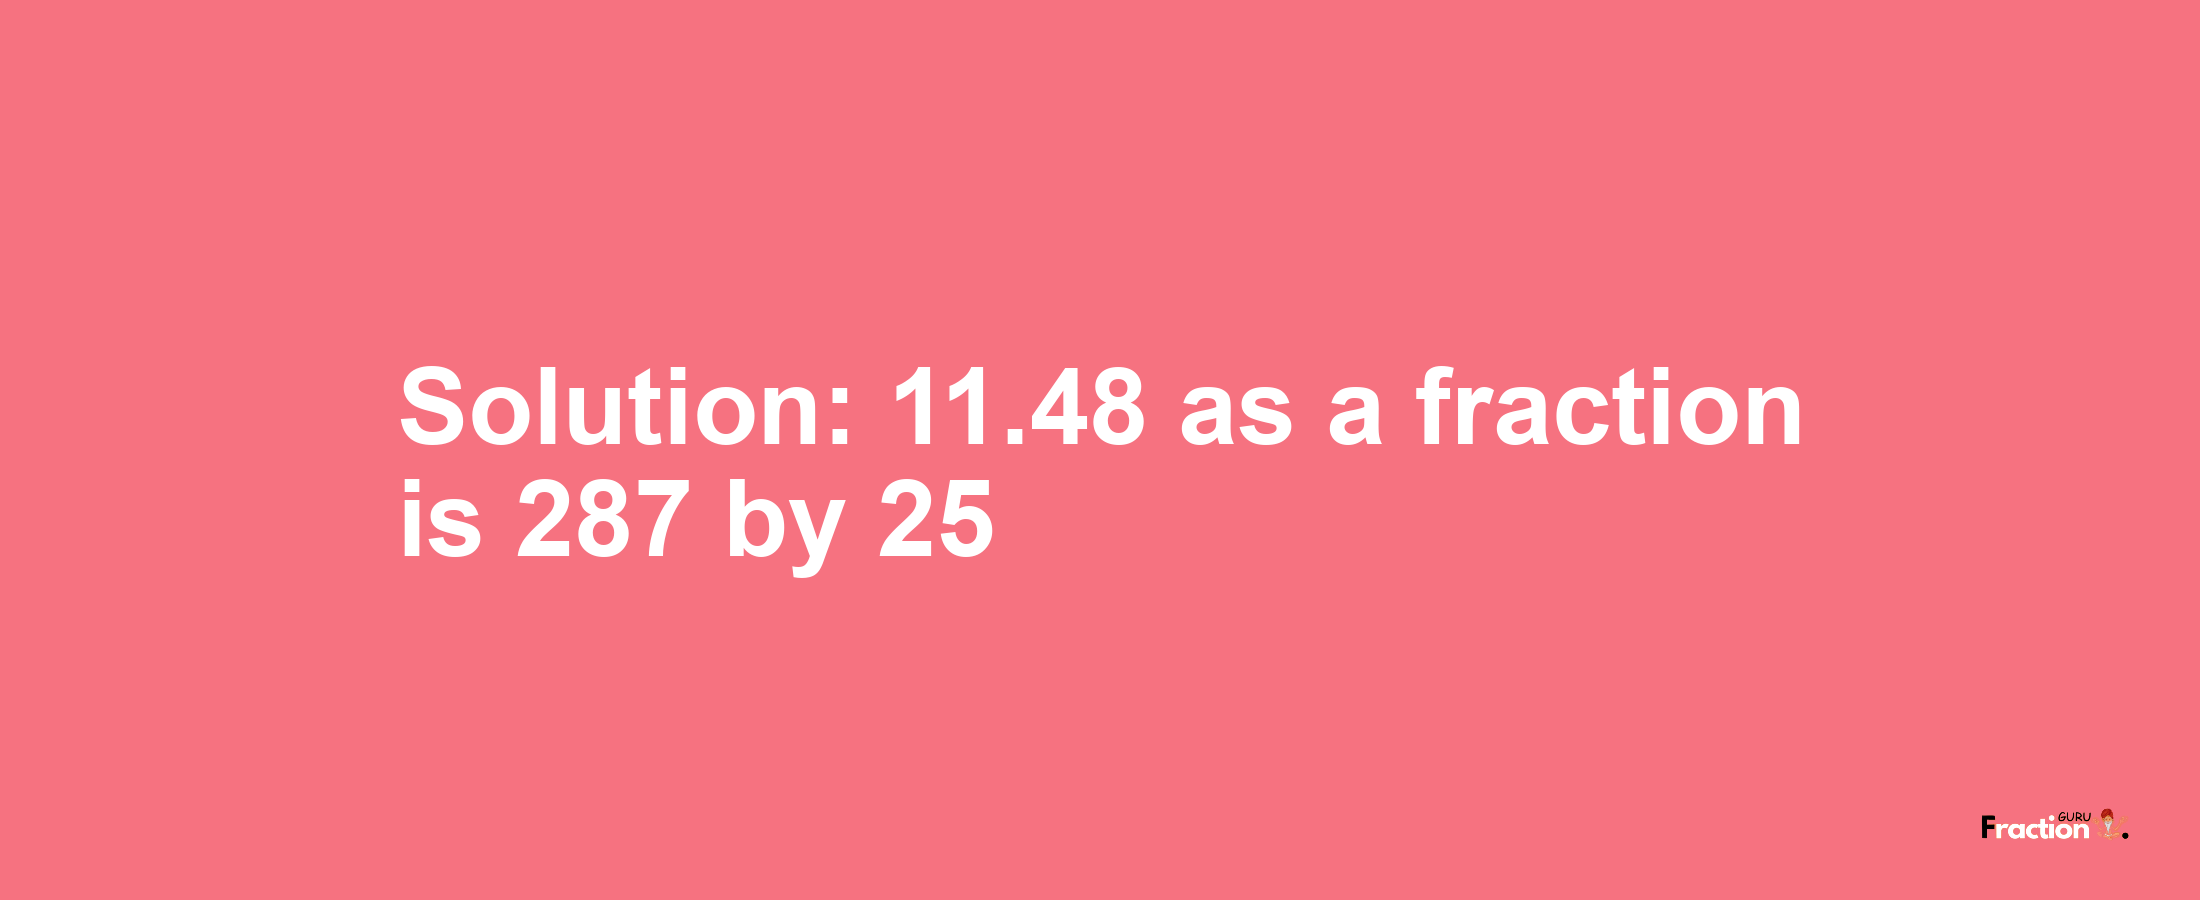 Solution:11.48 as a fraction is 287/25